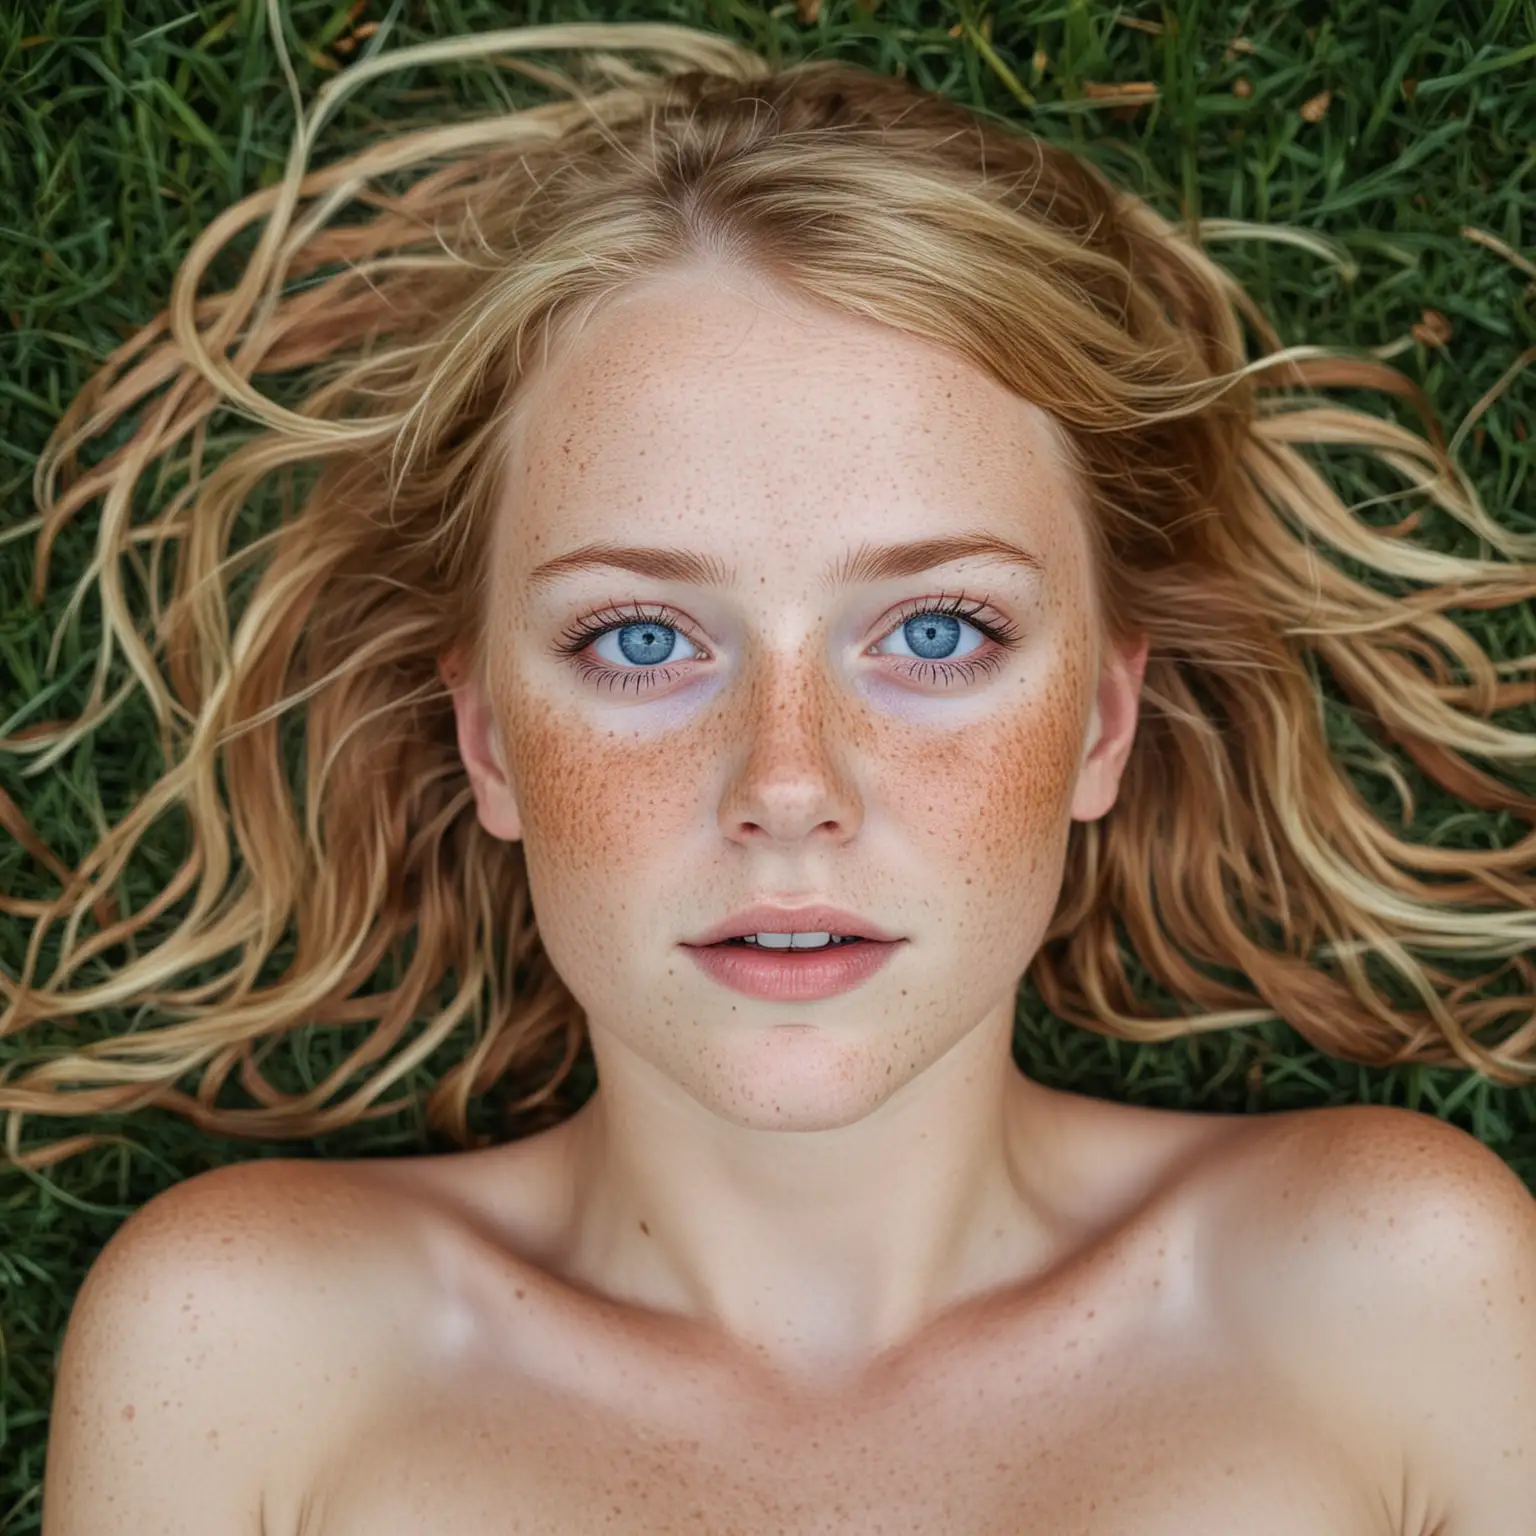 naked freckle face blonde blue-eyed girl laying on back in grass look of terror on her face